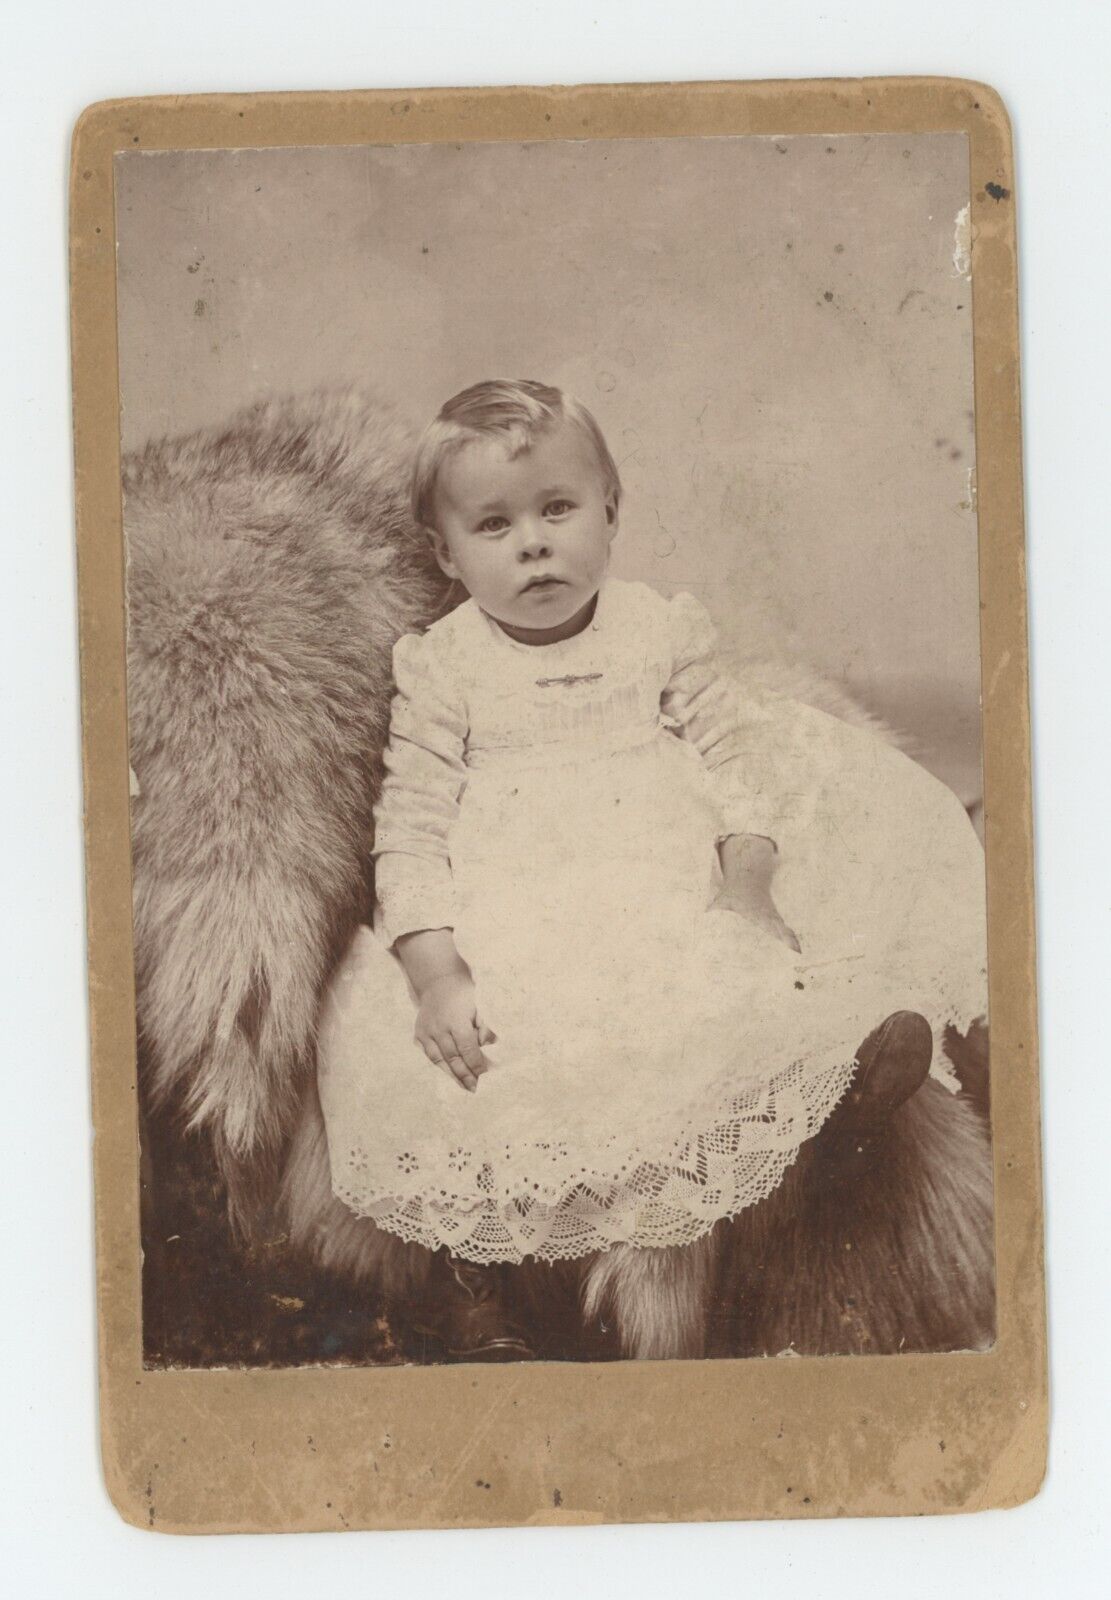 Antique Circa 1880s Cabinet Card Adorable Little Child in Dress Sitting on Fur